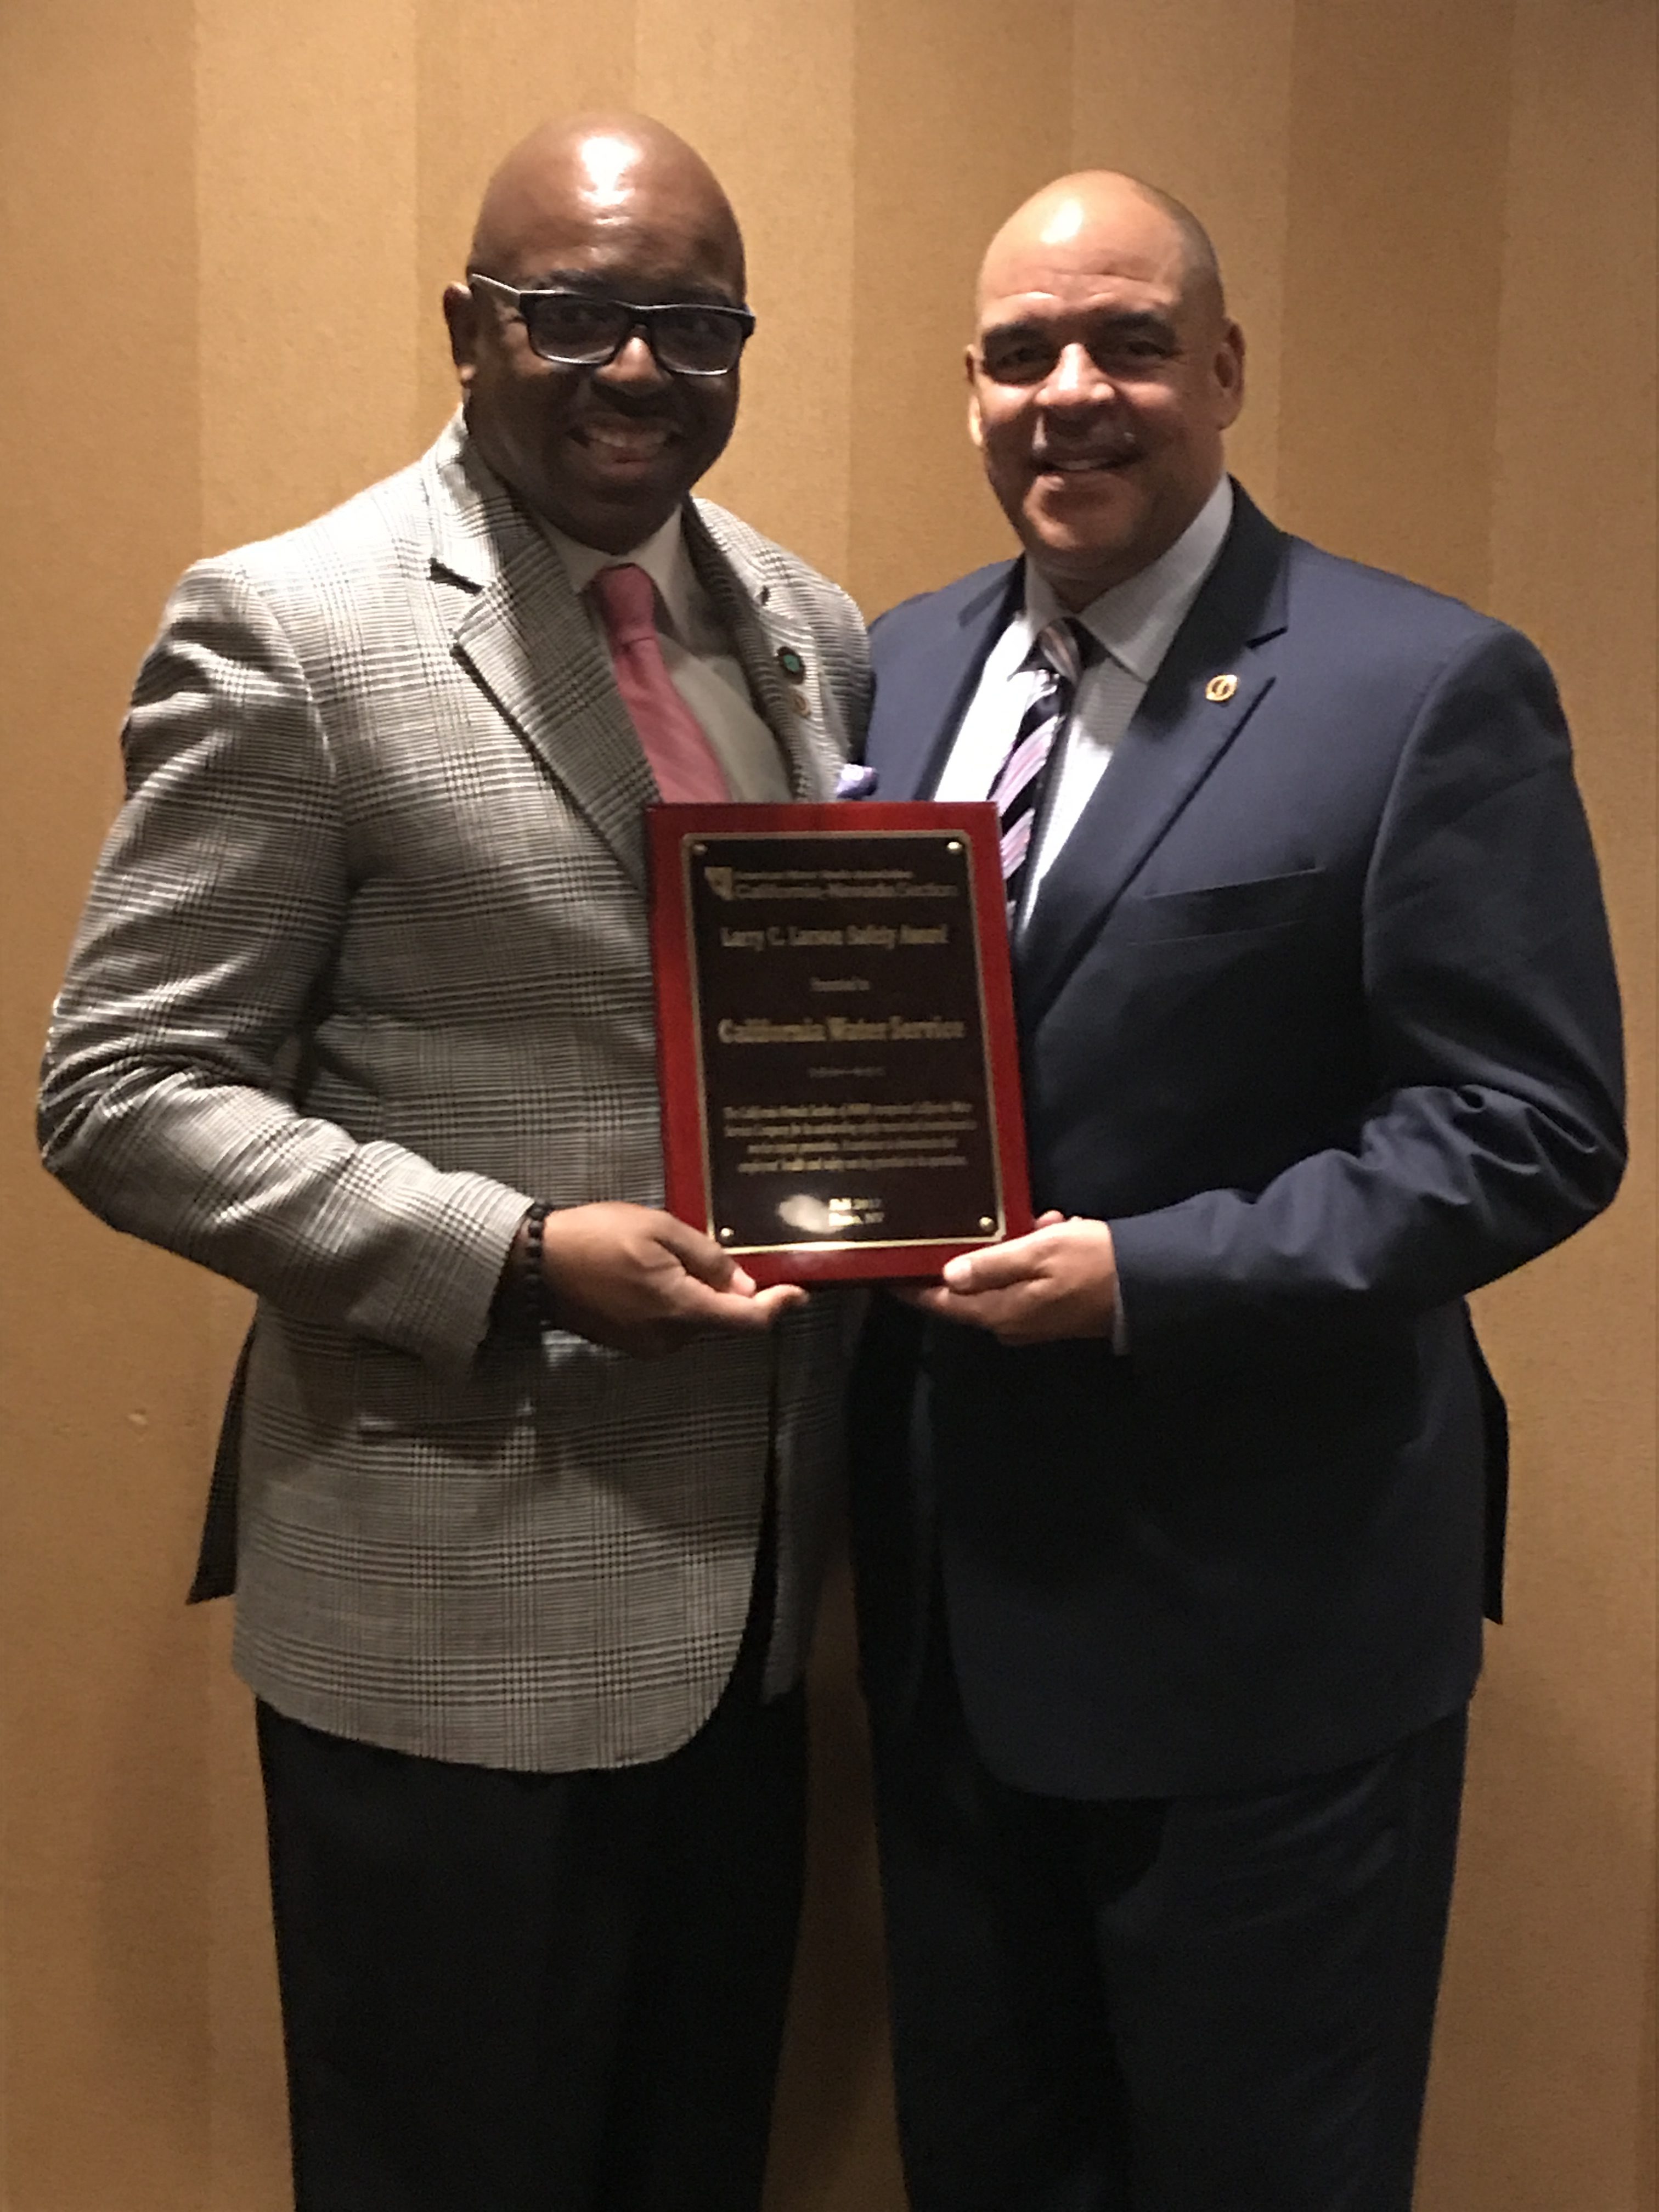 Chief Safety Officer Gerald Simon and Safety Program Manager Alex Williams accept the AWWA Safety Award.